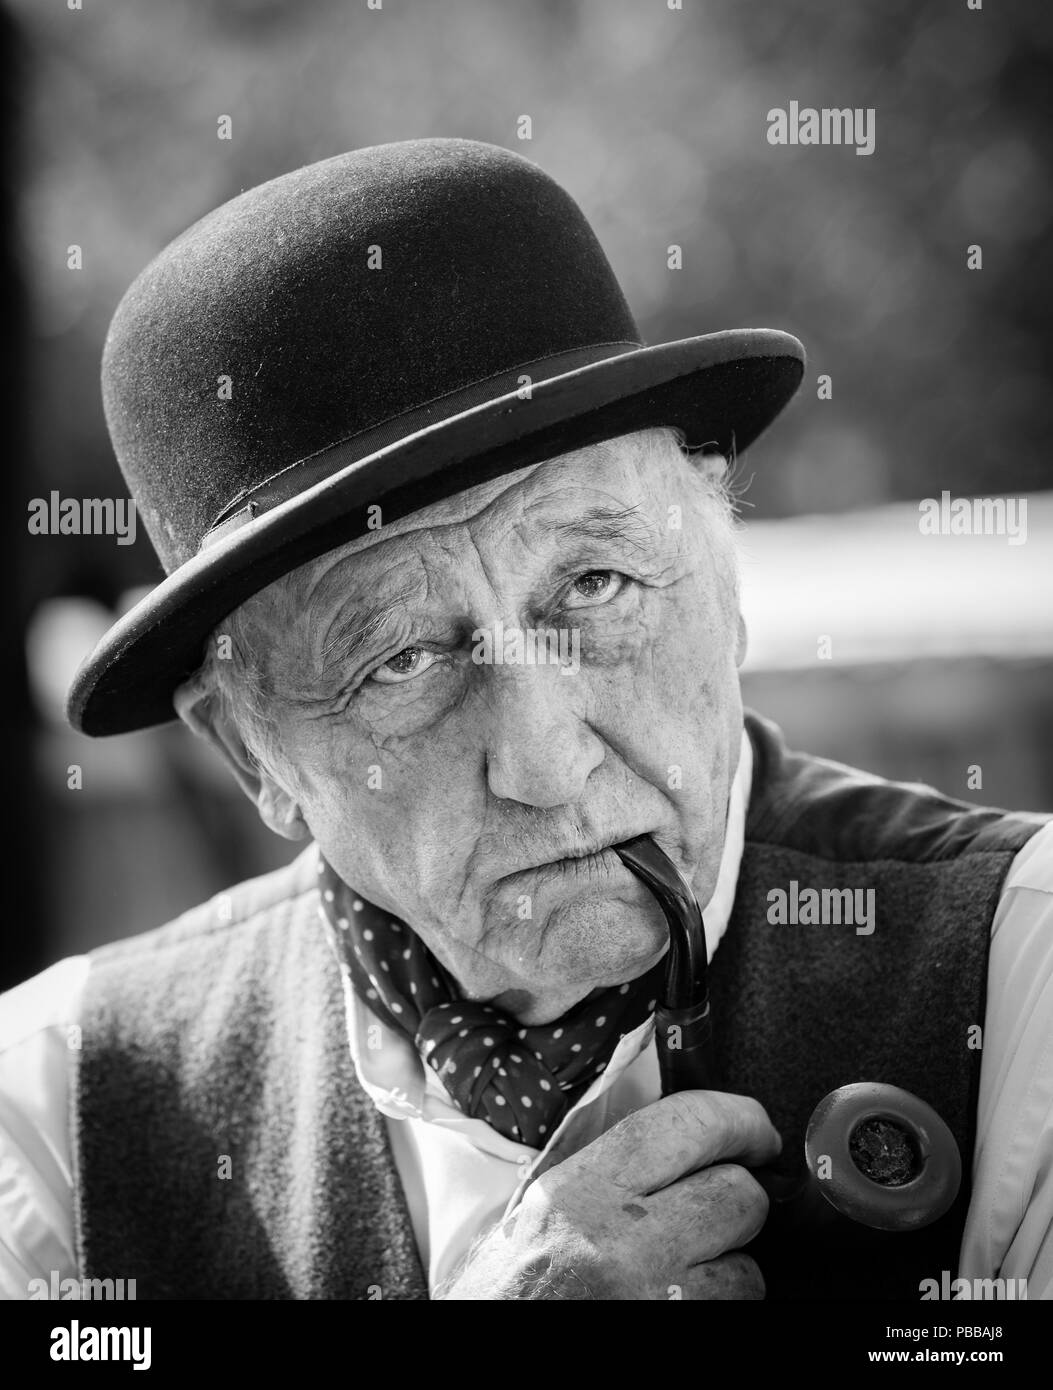 Black & white front view portrait, senior man in black bowler hat smoking pipe, deep in thought, looking serious solemn: UK 1940s. Stock Photo